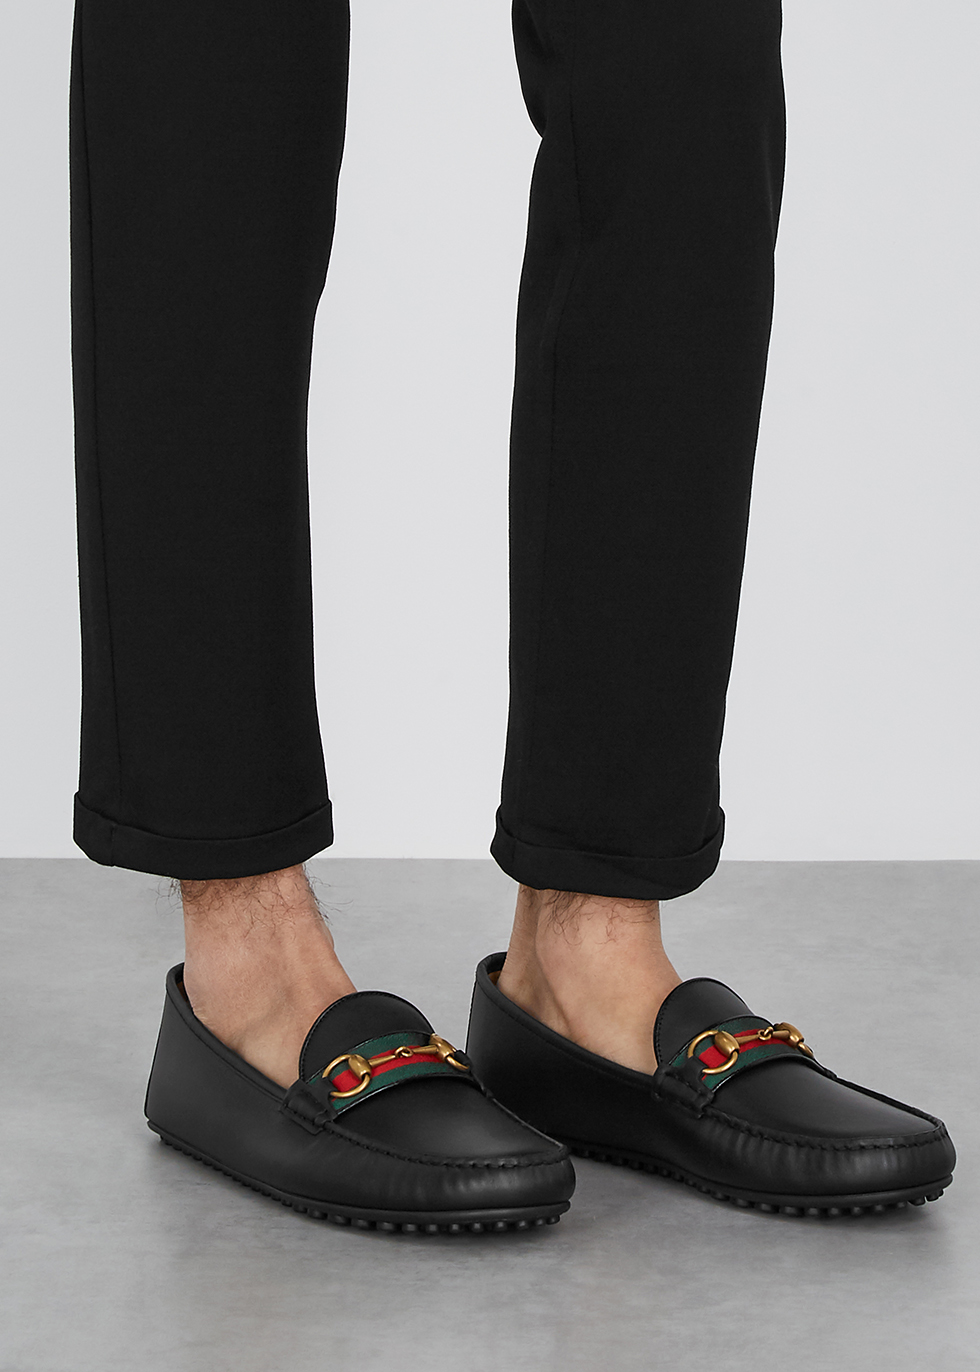 Gucci Kanye black leather driving shoes 